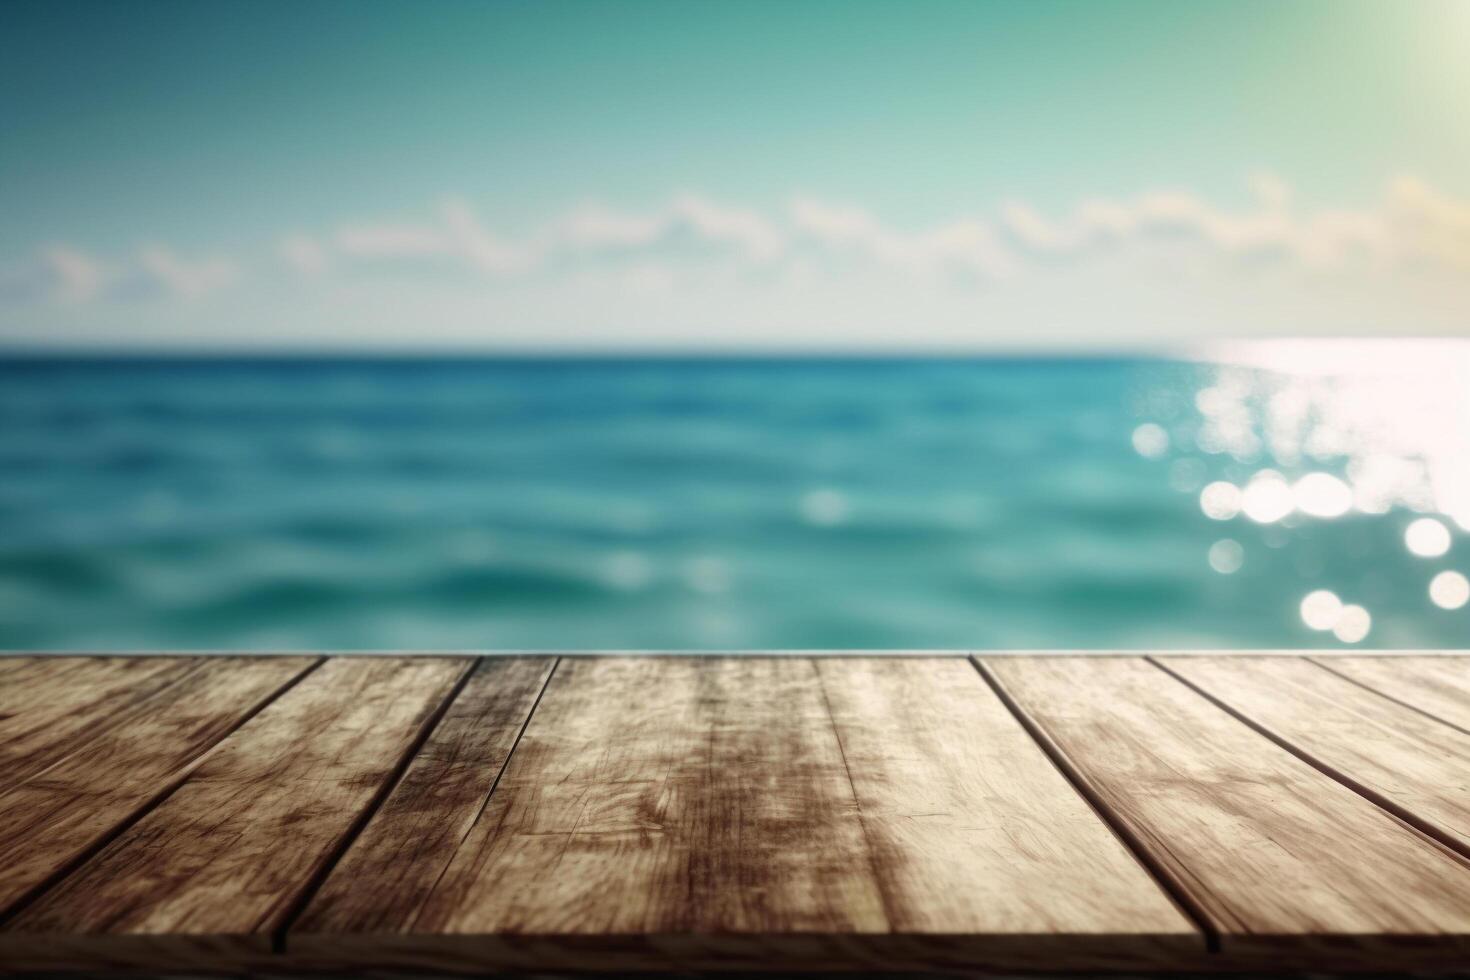 An Empty wooden table top with a blurred view of the ocean landscape in the background, photo